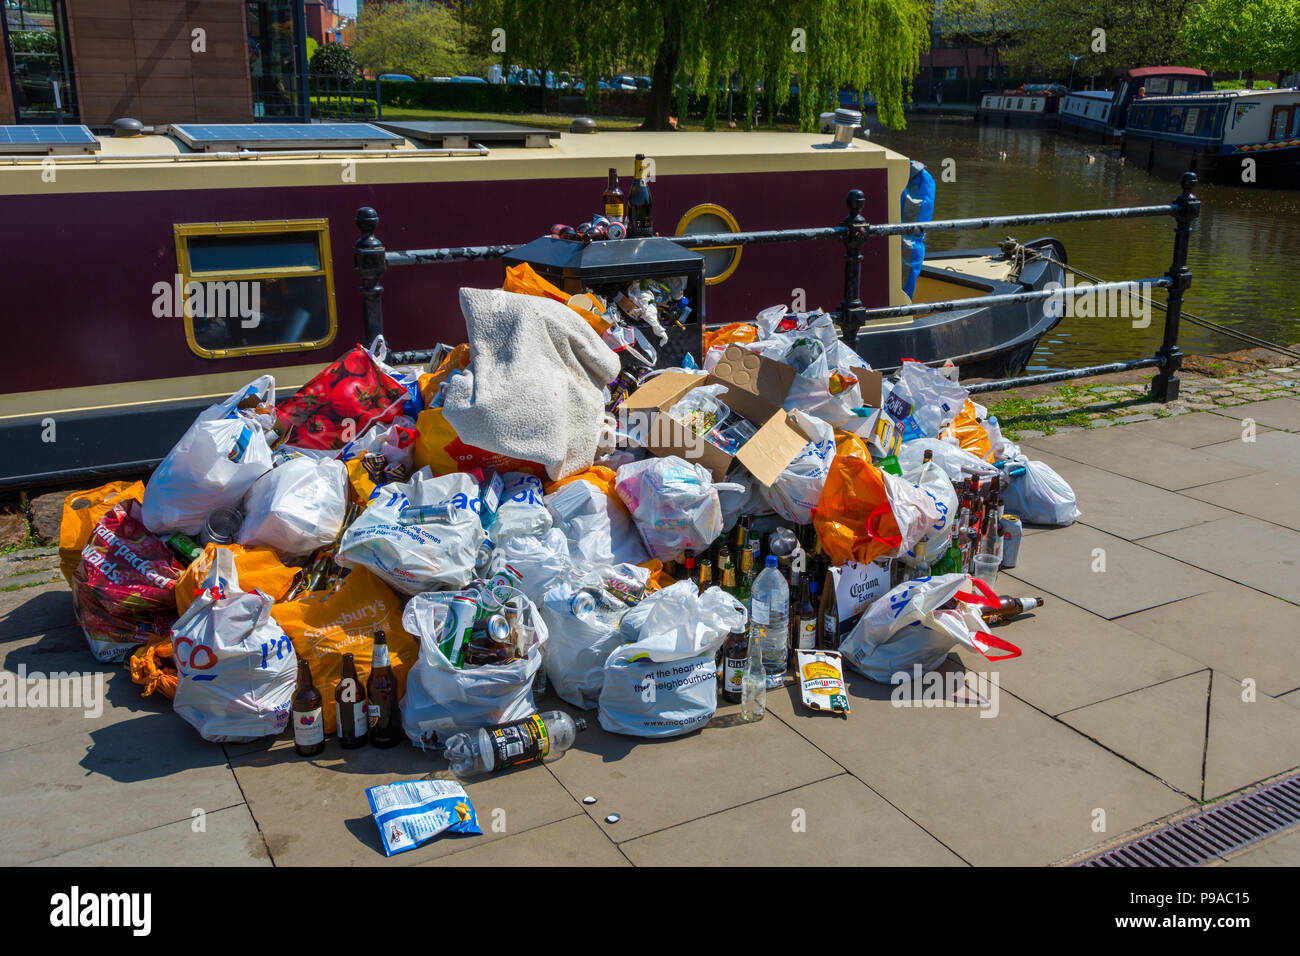 Bags of rubbish around an overflowing waste bin after a hot and sunny bank holiday weekend, Castlefield Basin, Manchester, England, UK Stock Photo